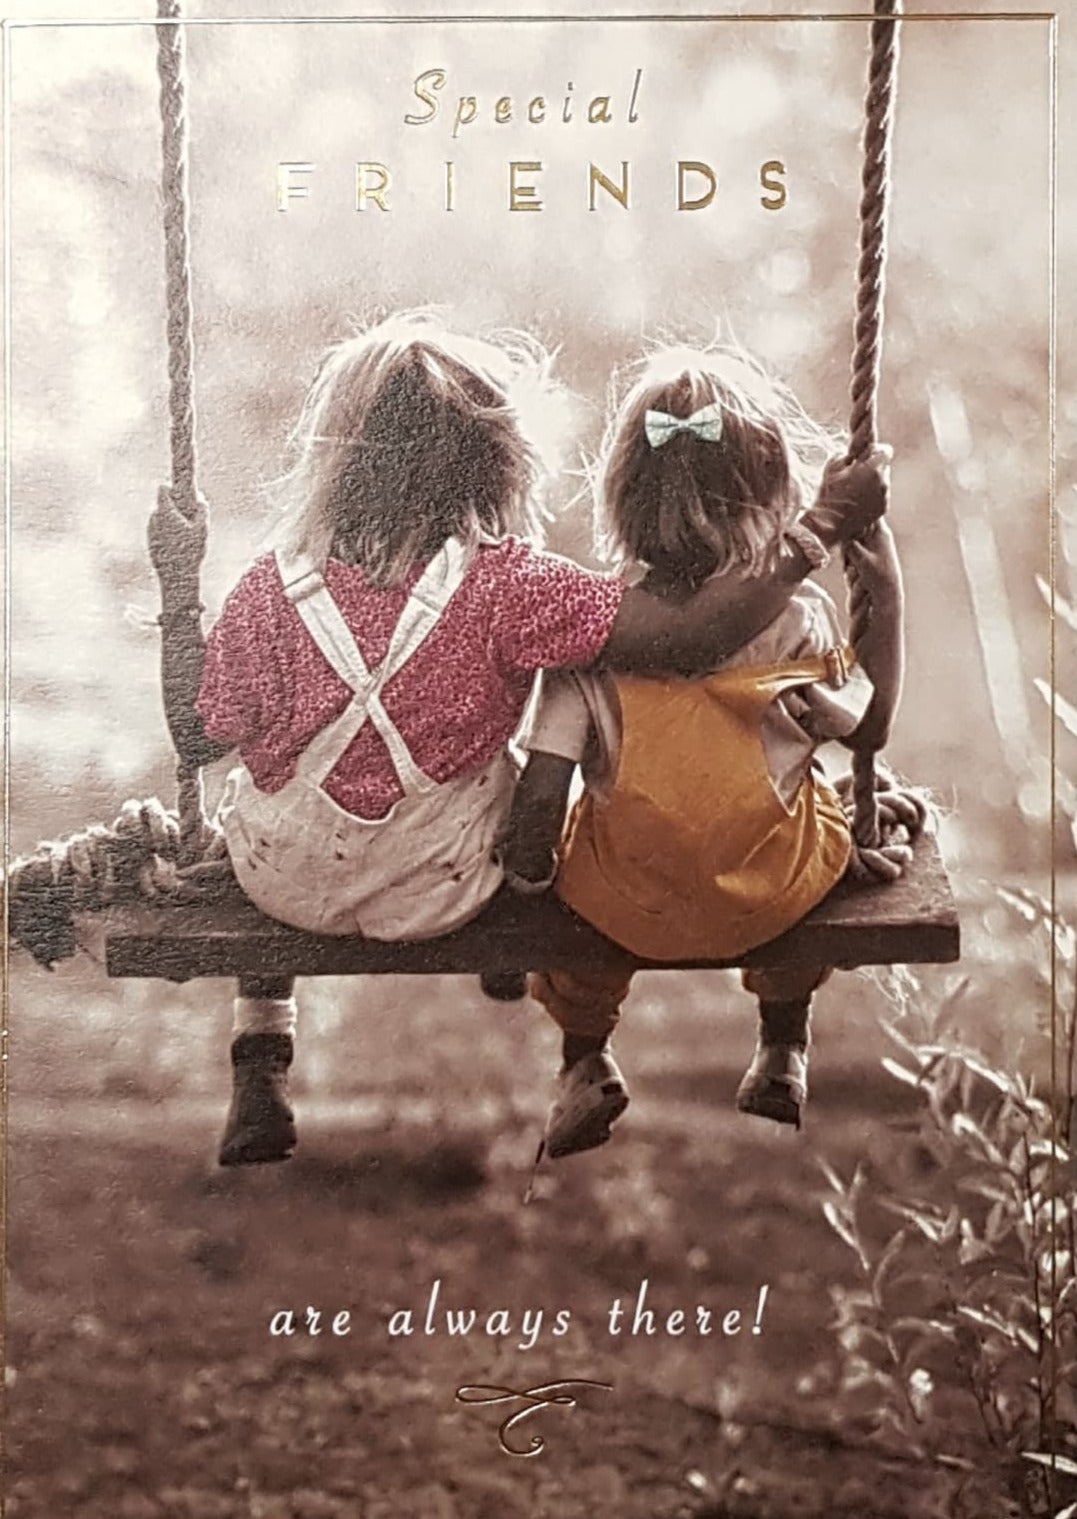 Birthday Card - Special Friend / Two Little Girls On A Swing